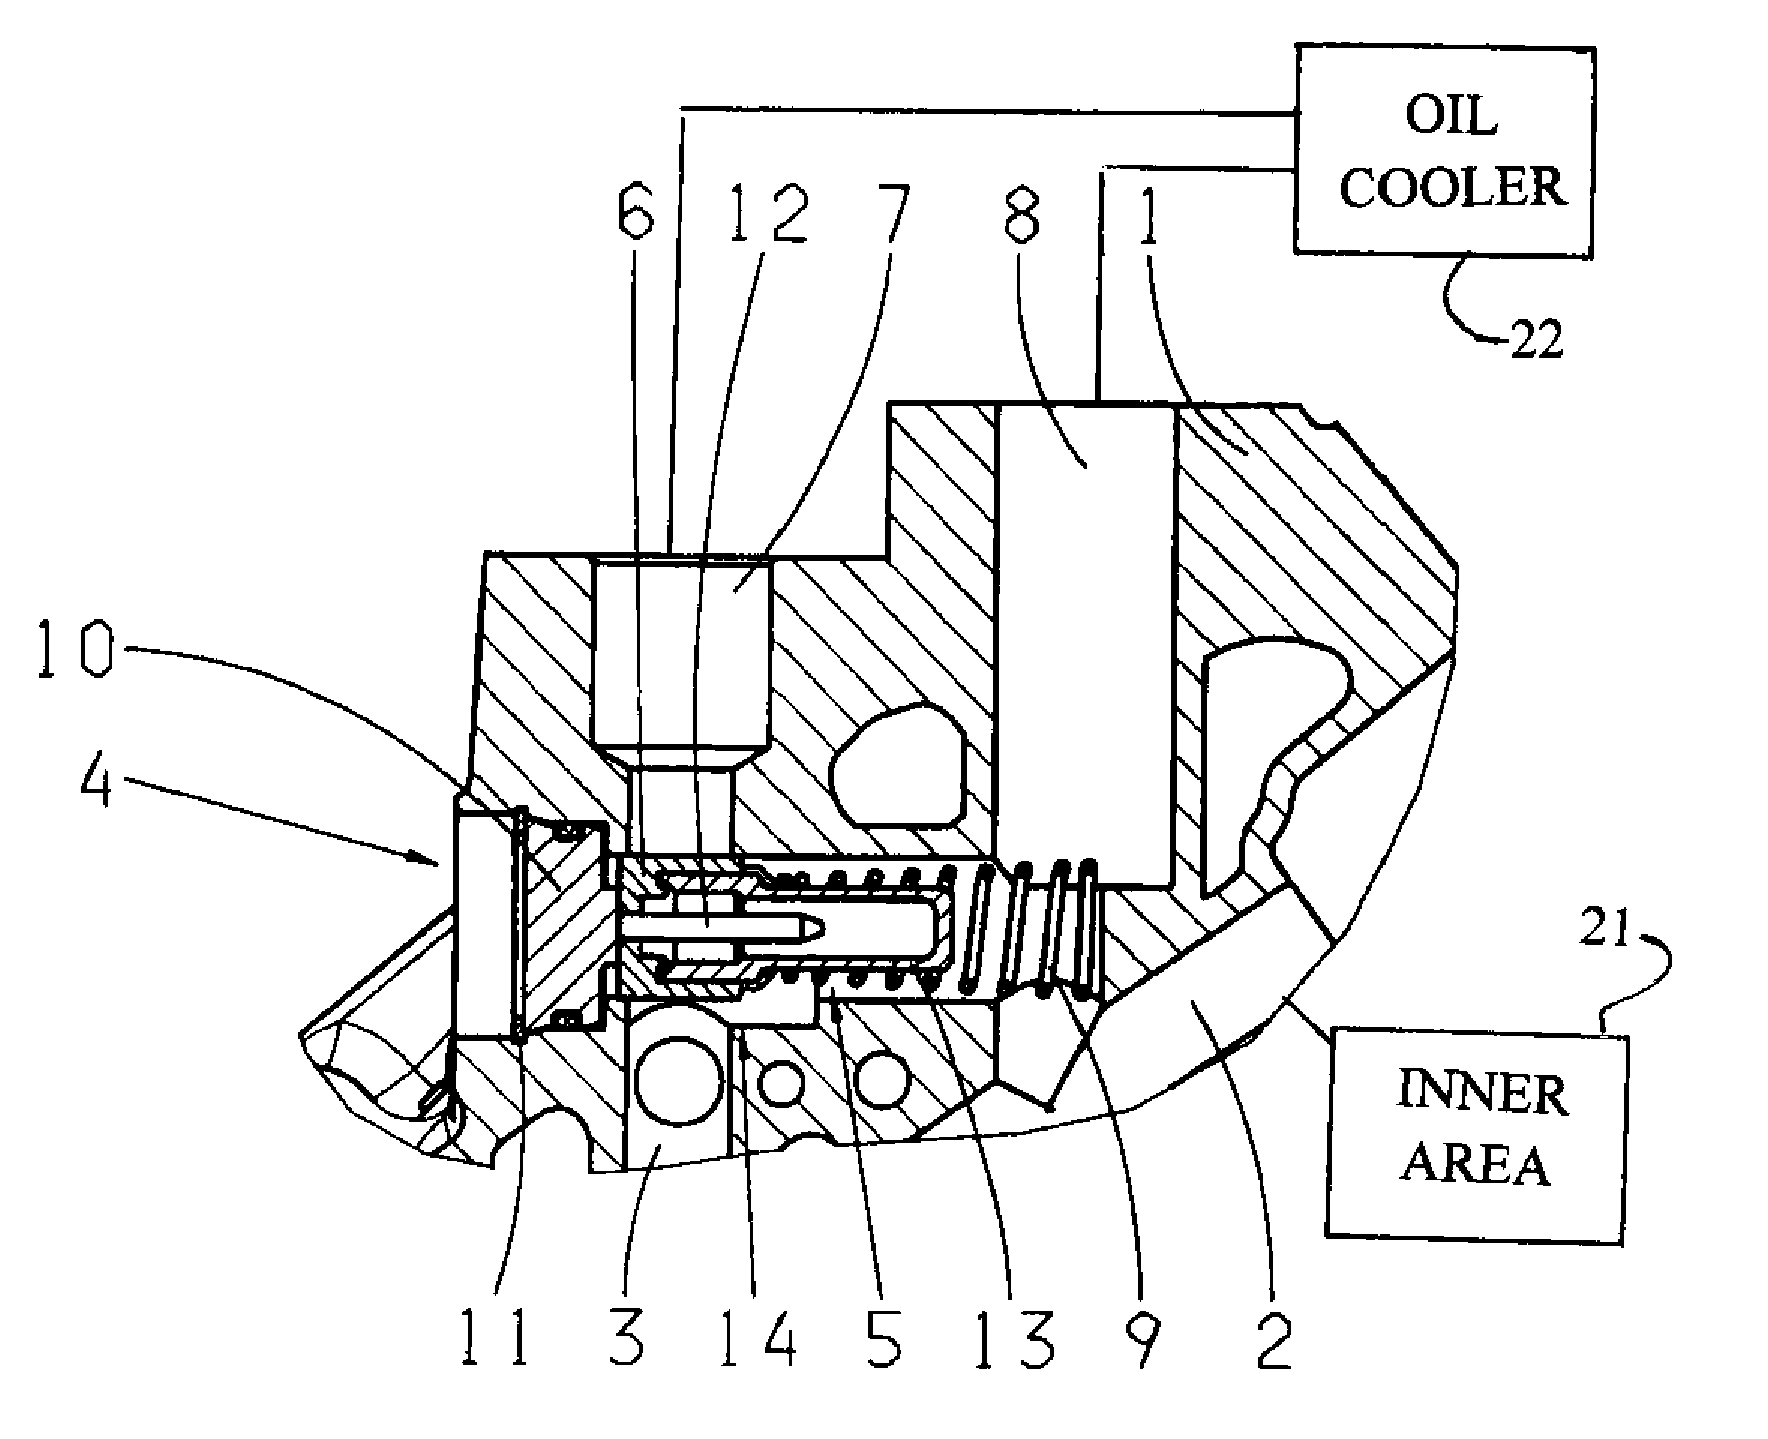 Cooling oil circulation of a motor-vehicle transmission with a control valve